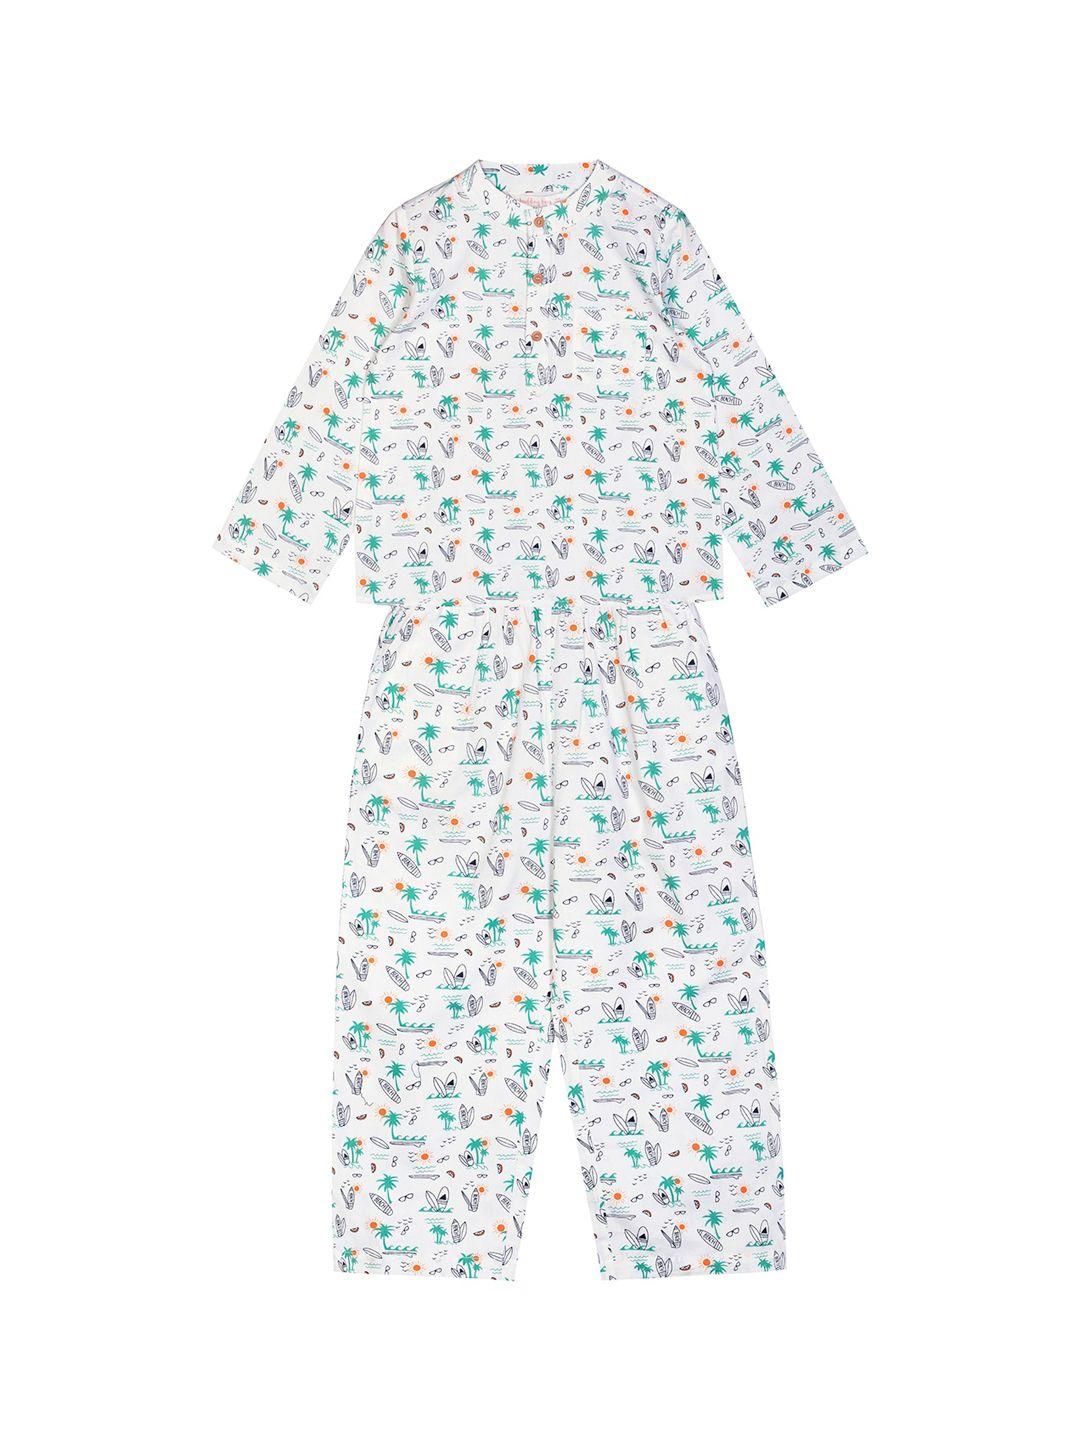 budding bees boys white & blue printed night suit